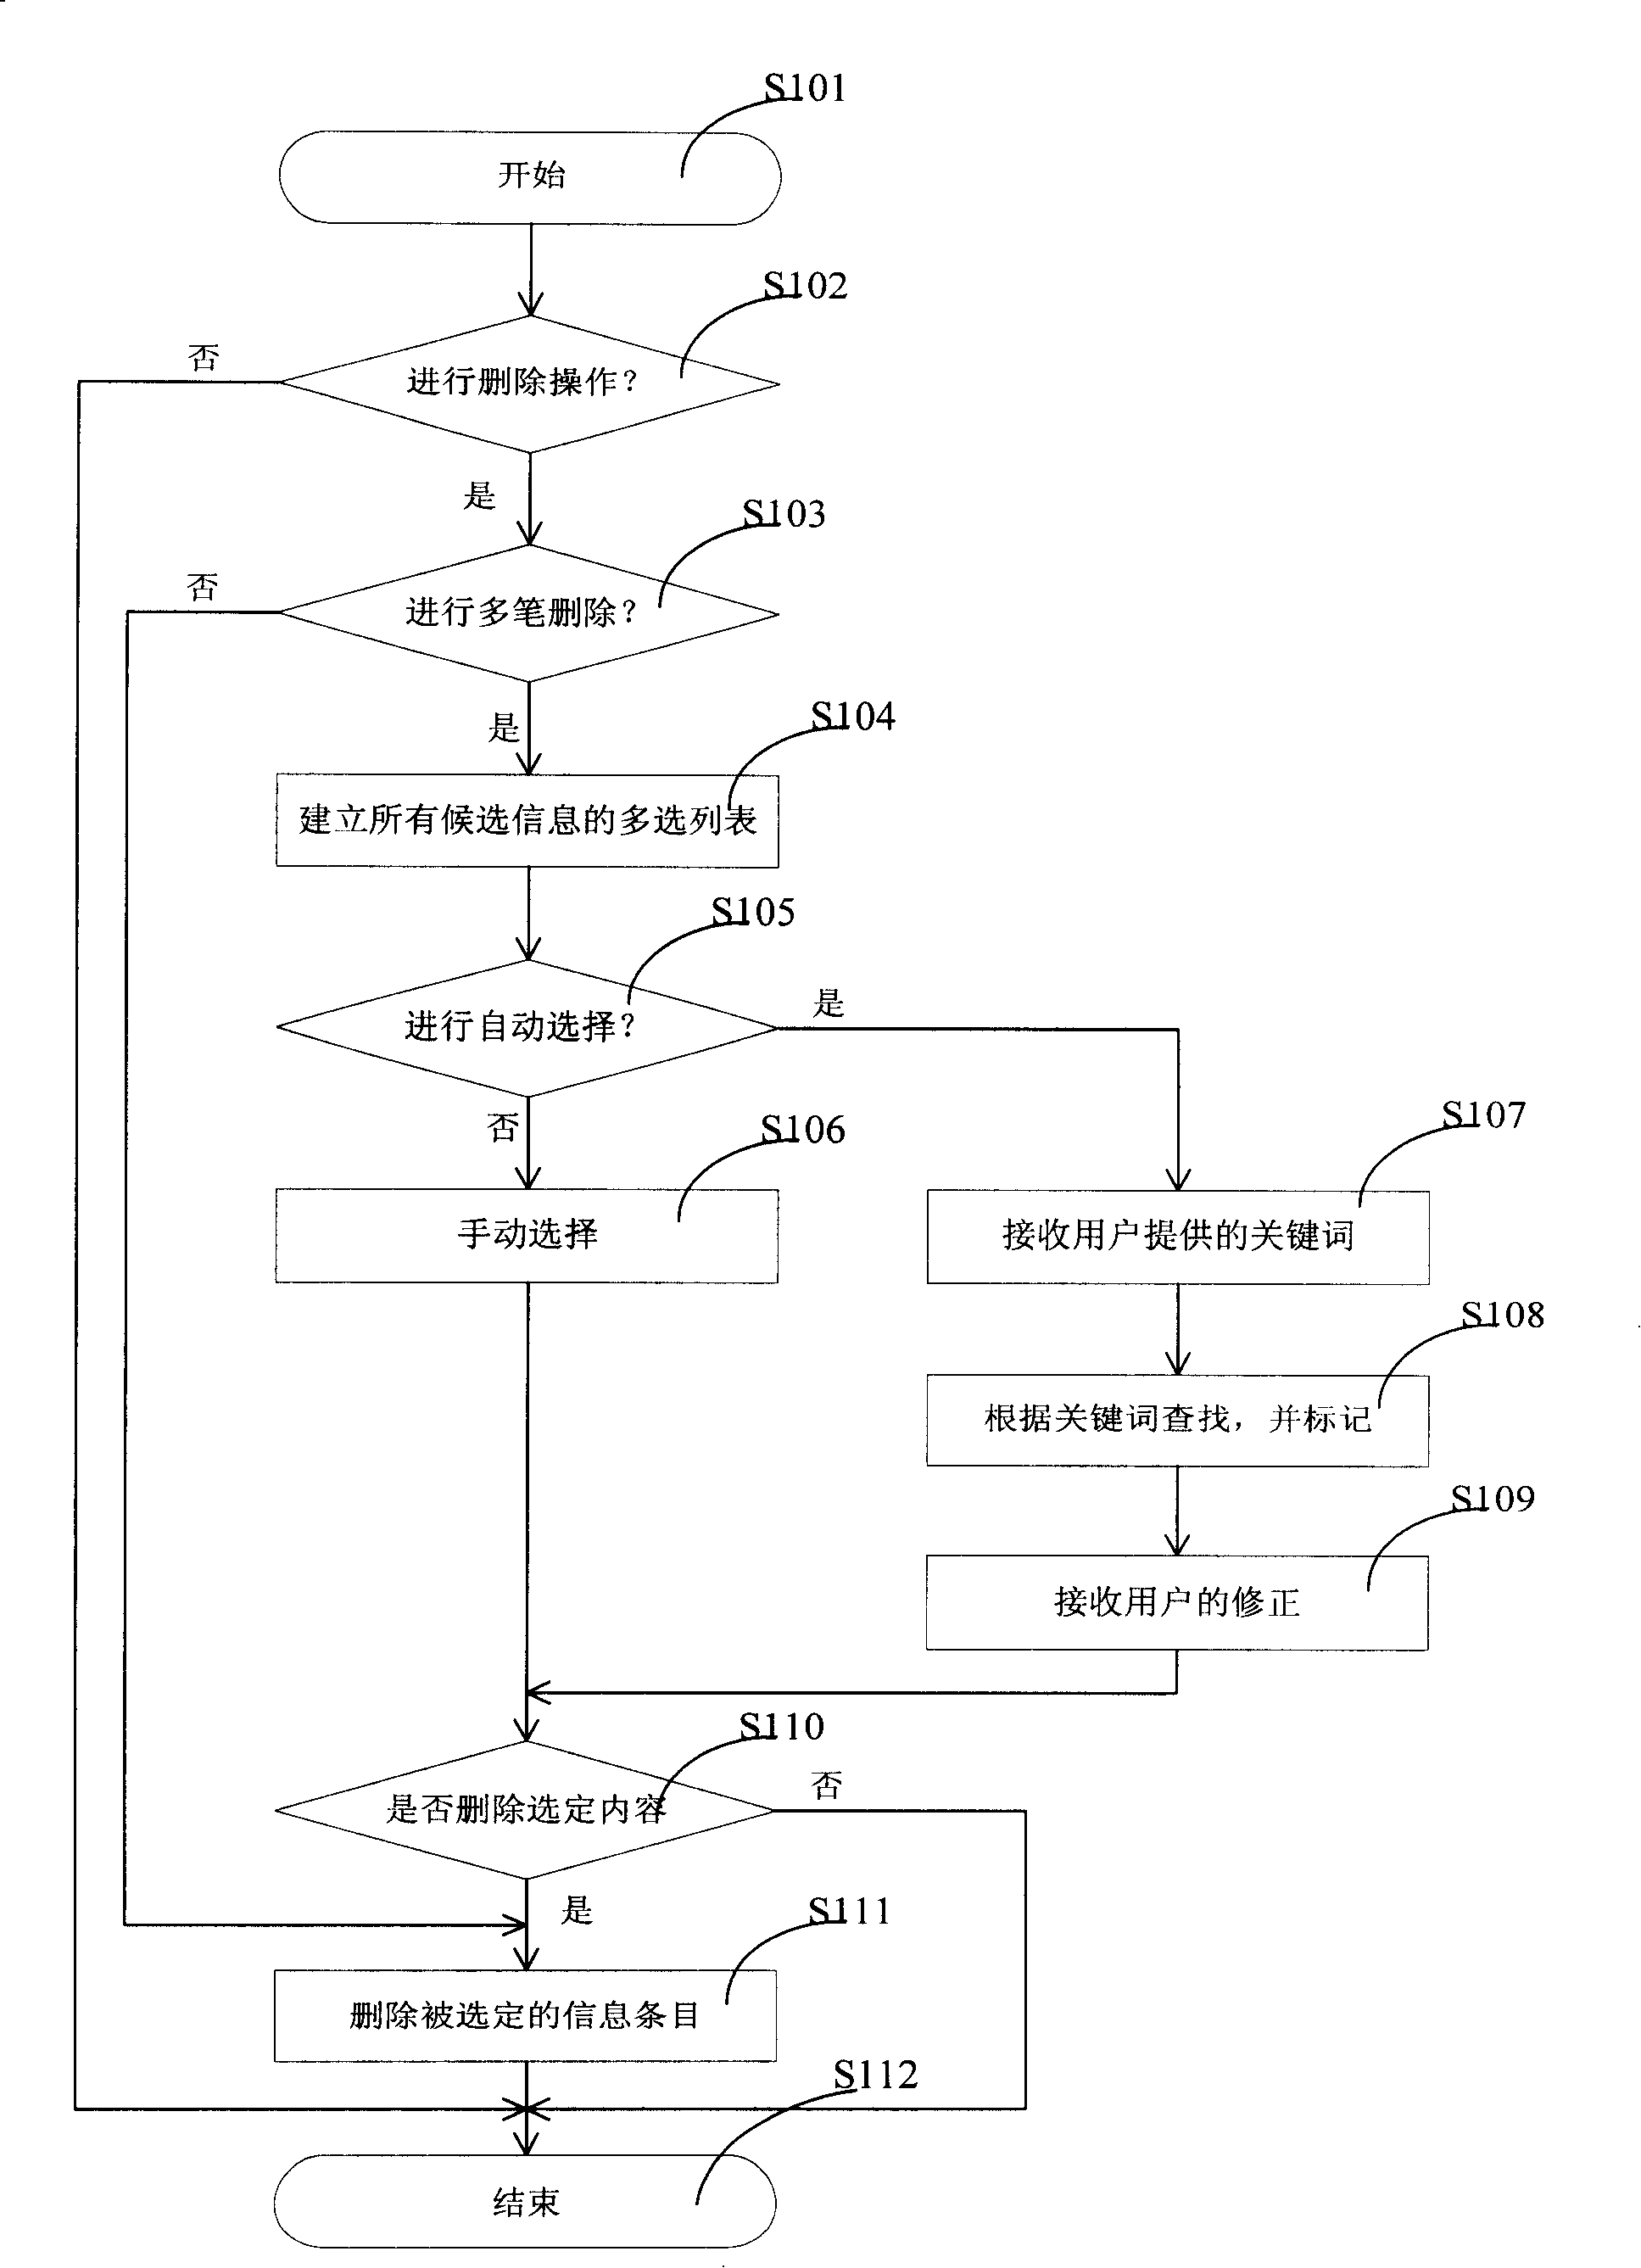 Method and device for clearing mobile telephone data entries